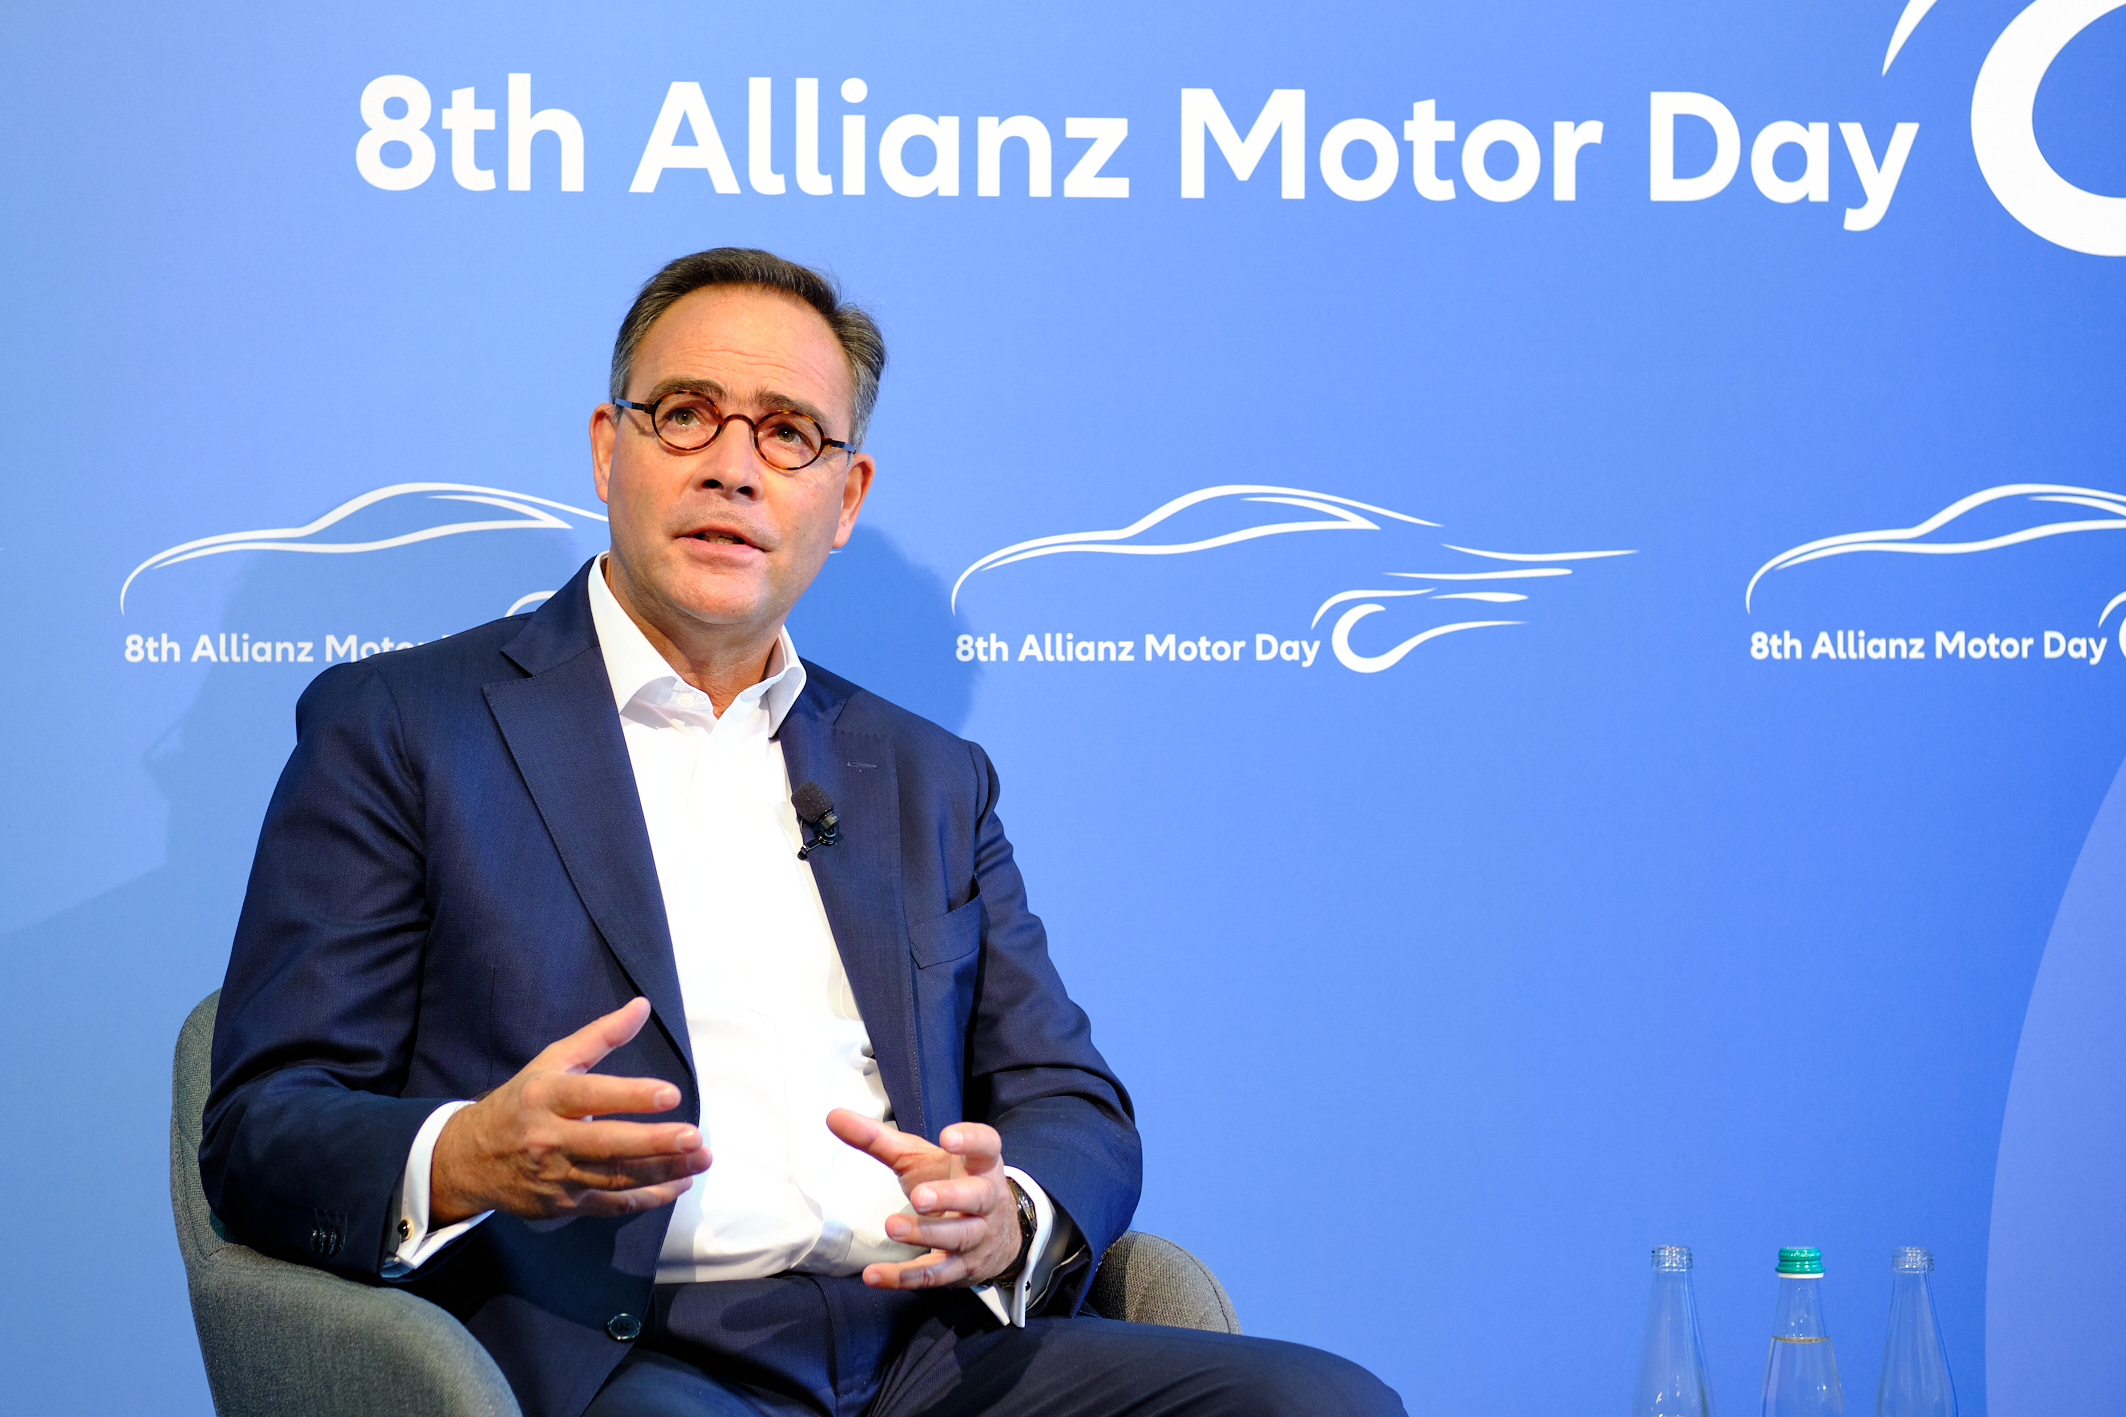 Dr. Klaus-Peter Röhler (CEO Allianz Deutschland AG and Member of the Board of Management of Allianz SE) answers the questions of the journalists